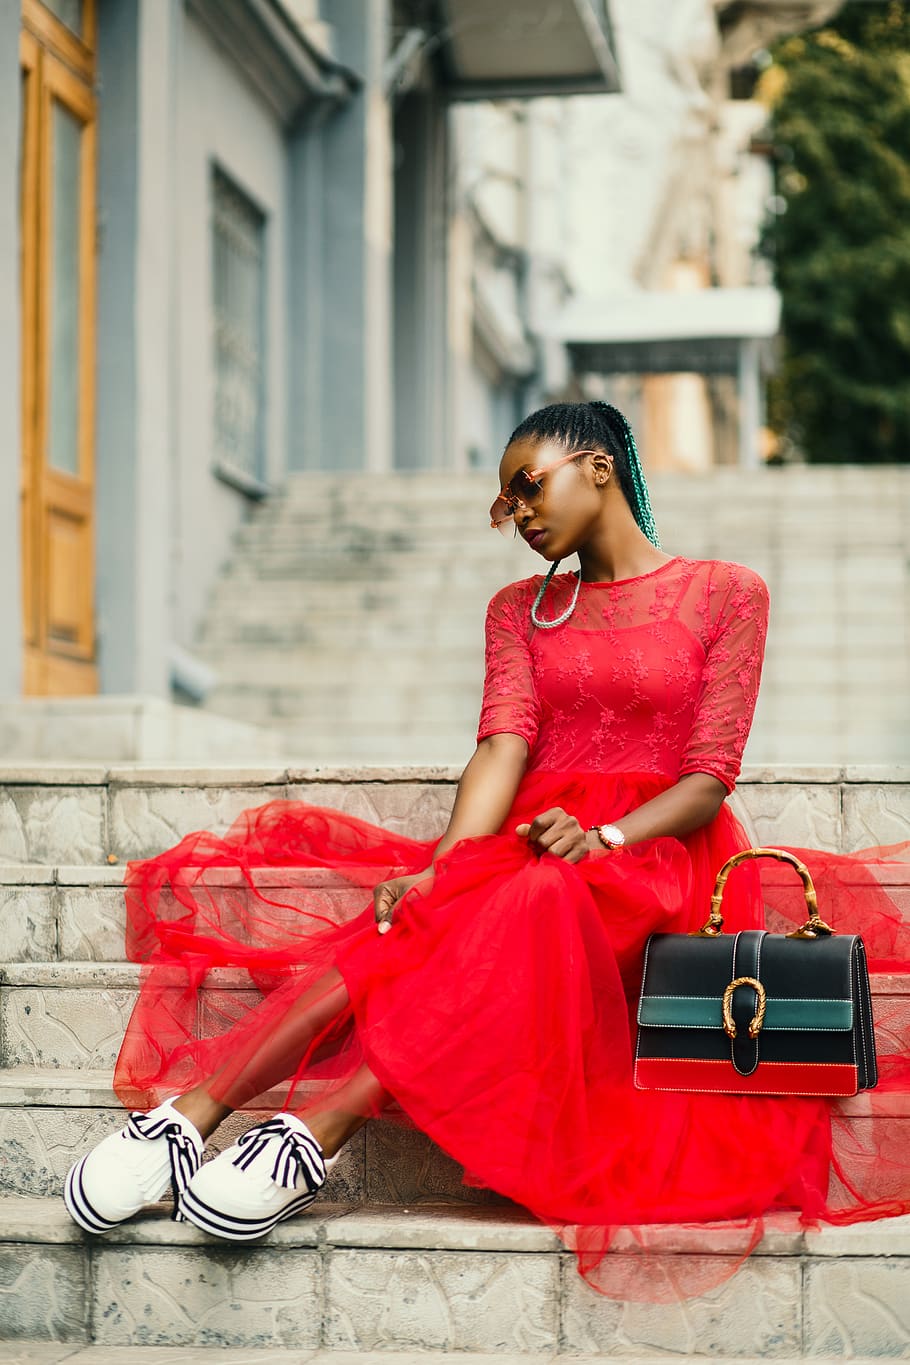 Woman Wearing Red Long-sleeved Dress Near Black Leather Bag Sitting on Concrete Stairs Posing for Photoshoot, HD wallpaper